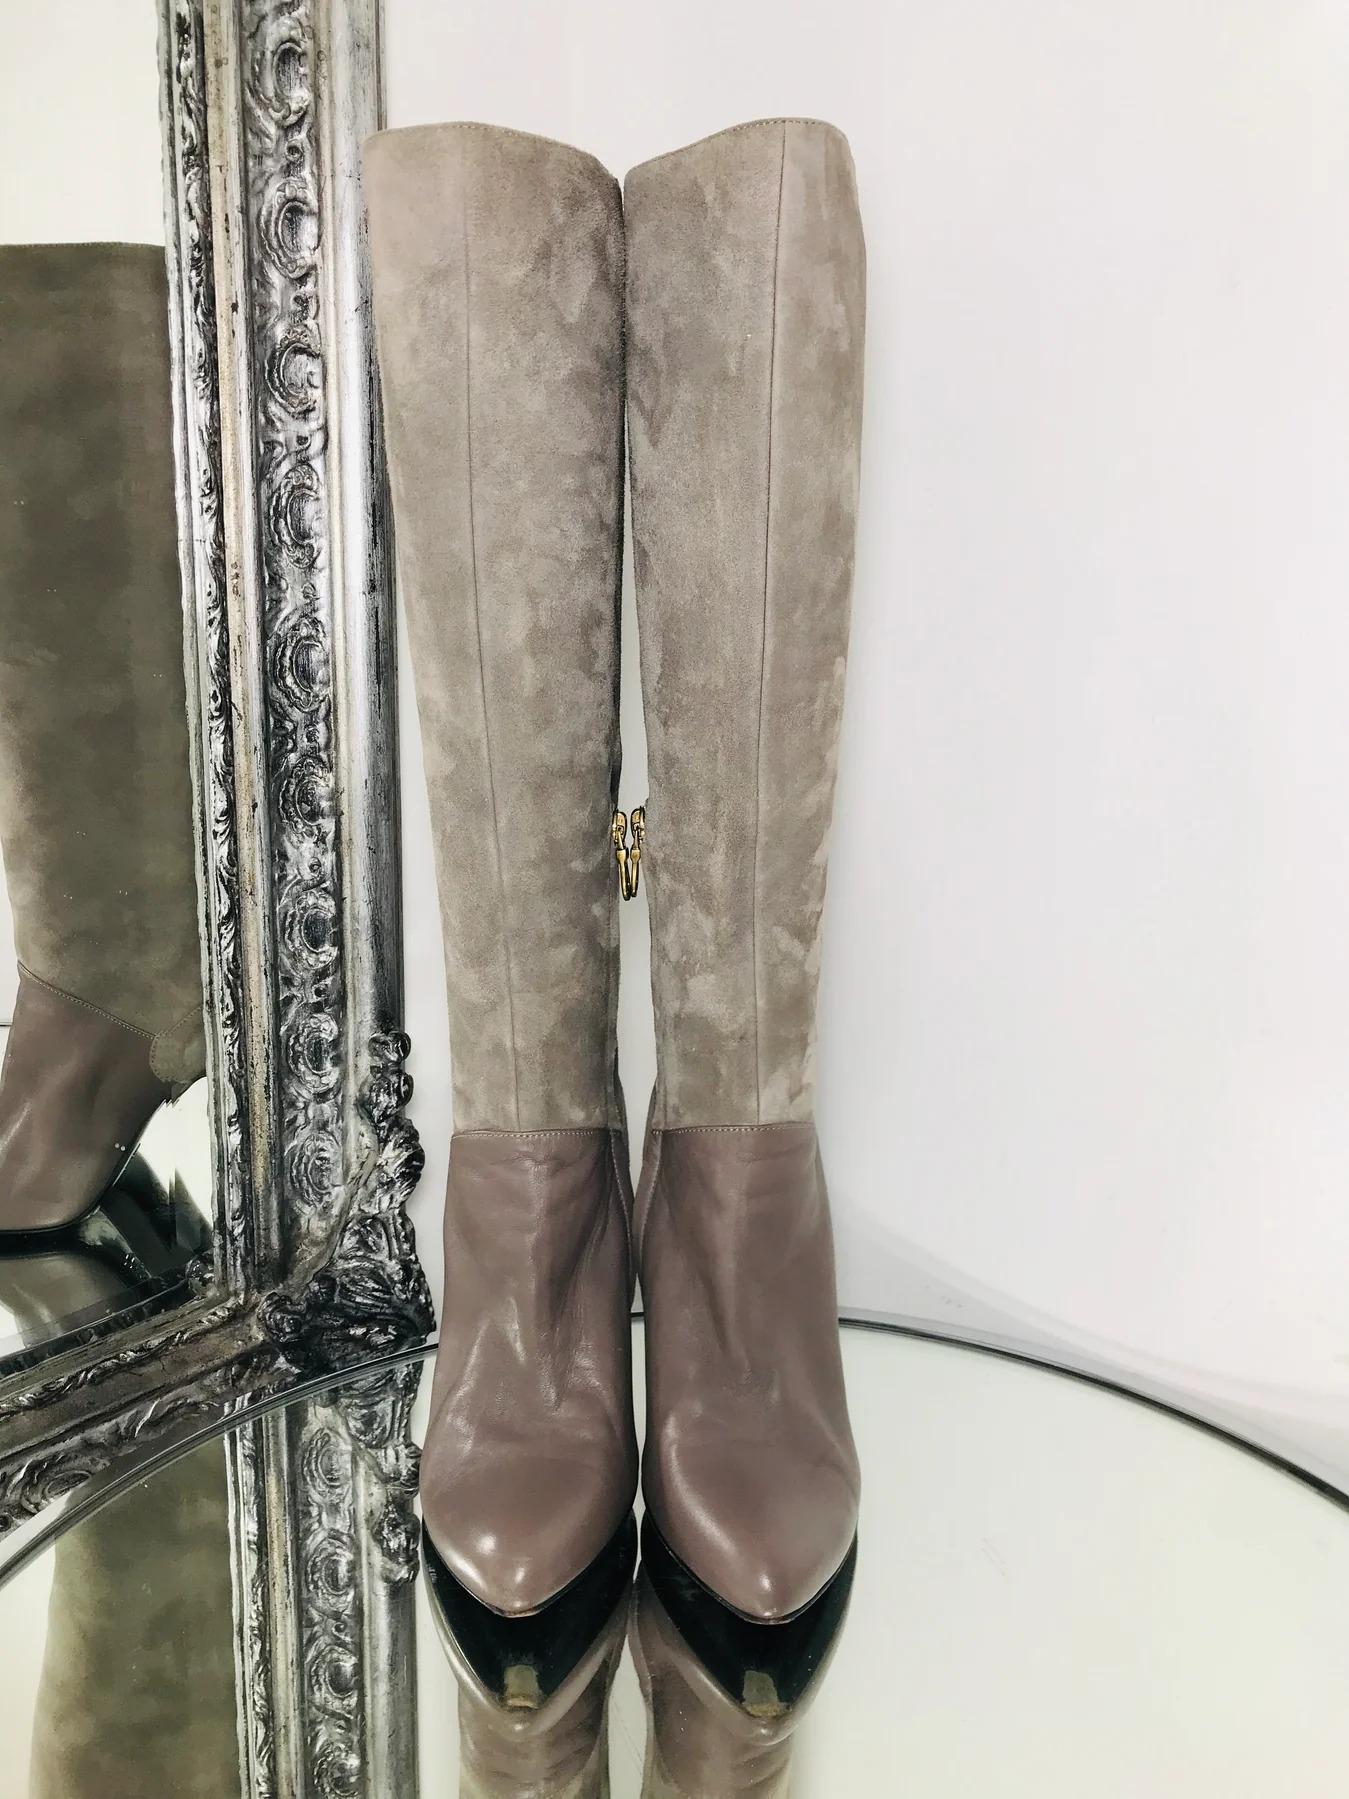 Bally Taupe Knee High Boots Crafted from Suede and Leather

Side 'BALLY' engraved zip fastening in gold toned hardware. Features a pointed toe and 10.5cm spool heel.

Additional information:
Size – 38
Condition – Very Good